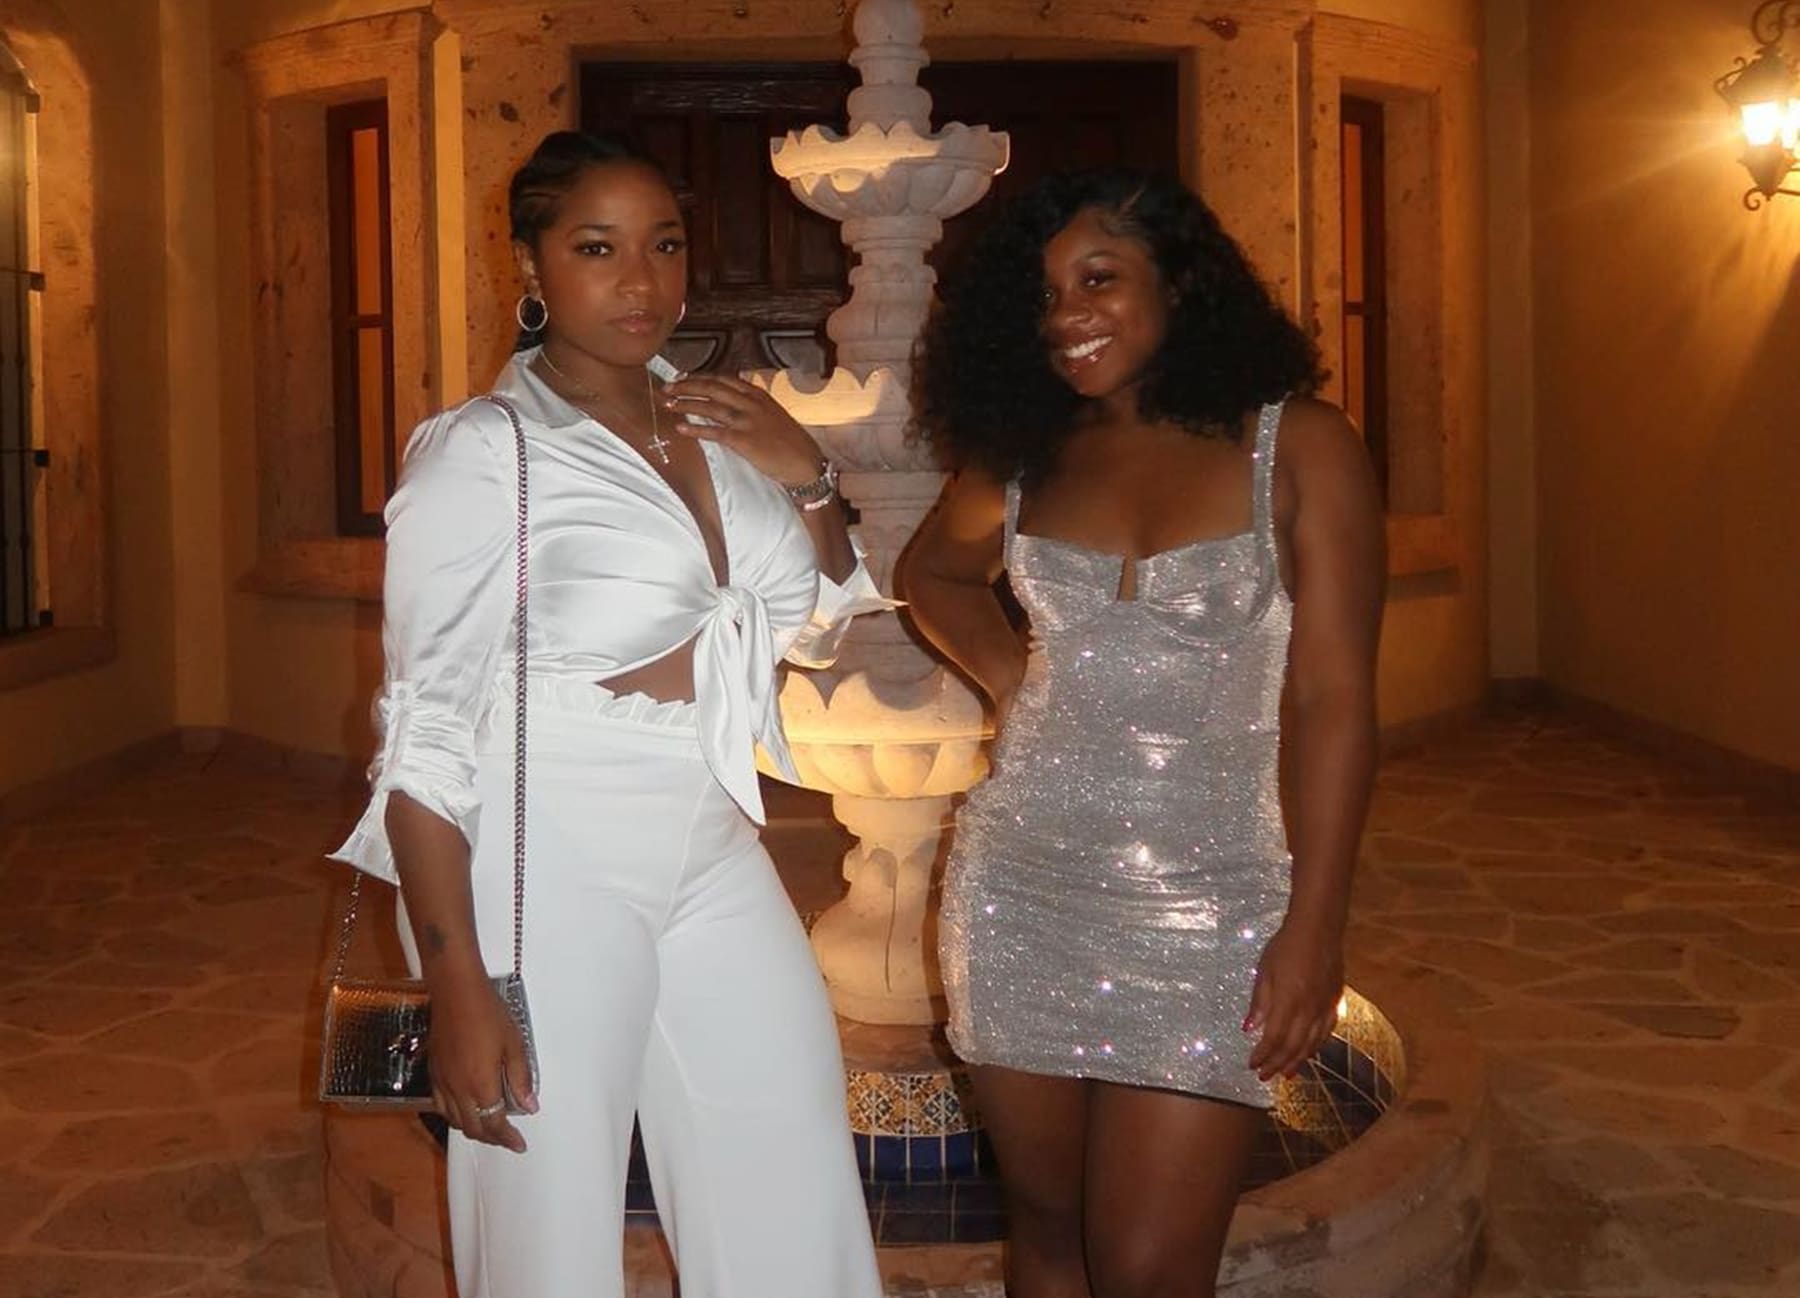 Toya Johnson Publicly Proclaims Her Love For Gorgeous Reginae Carter